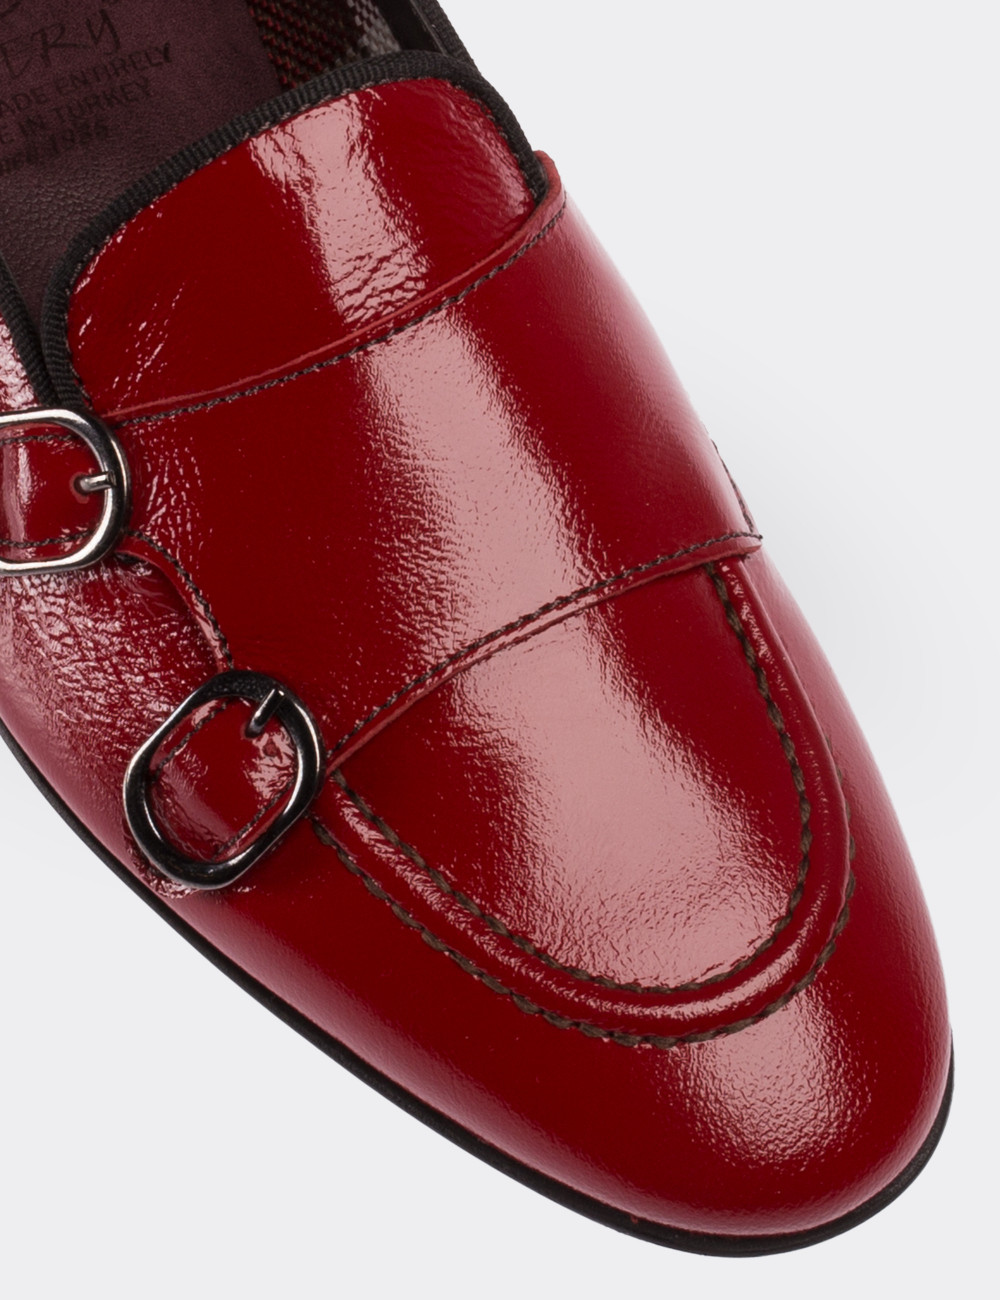 Red Patent Leather Loafers - 01617ZKRMM01